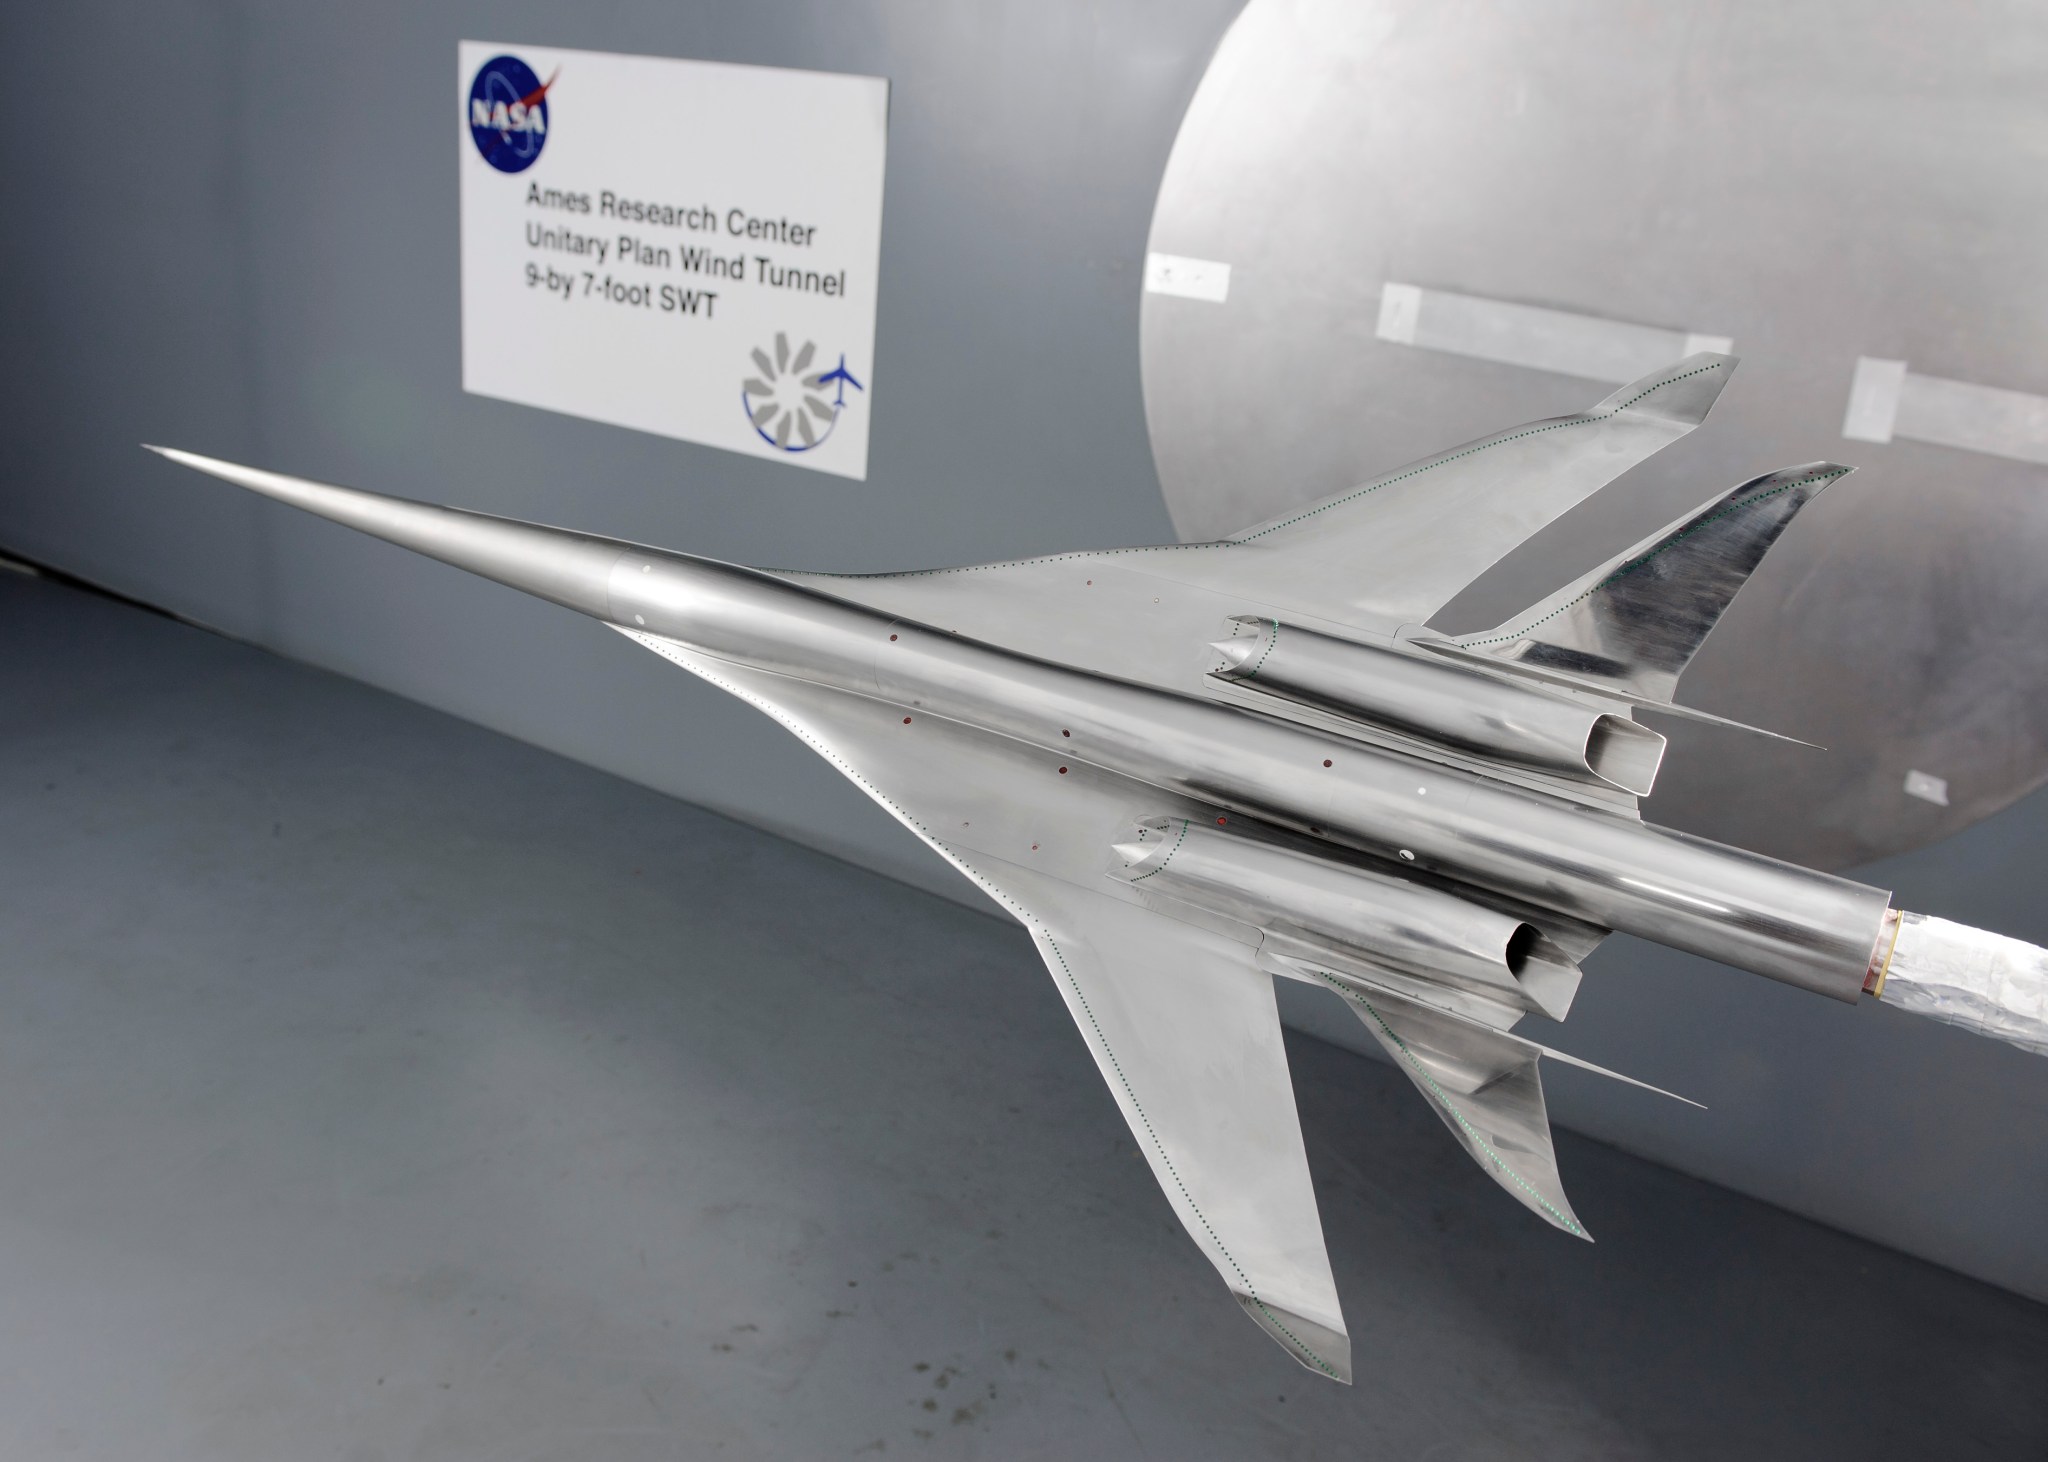 Scale model of airplane in wind tunnel.